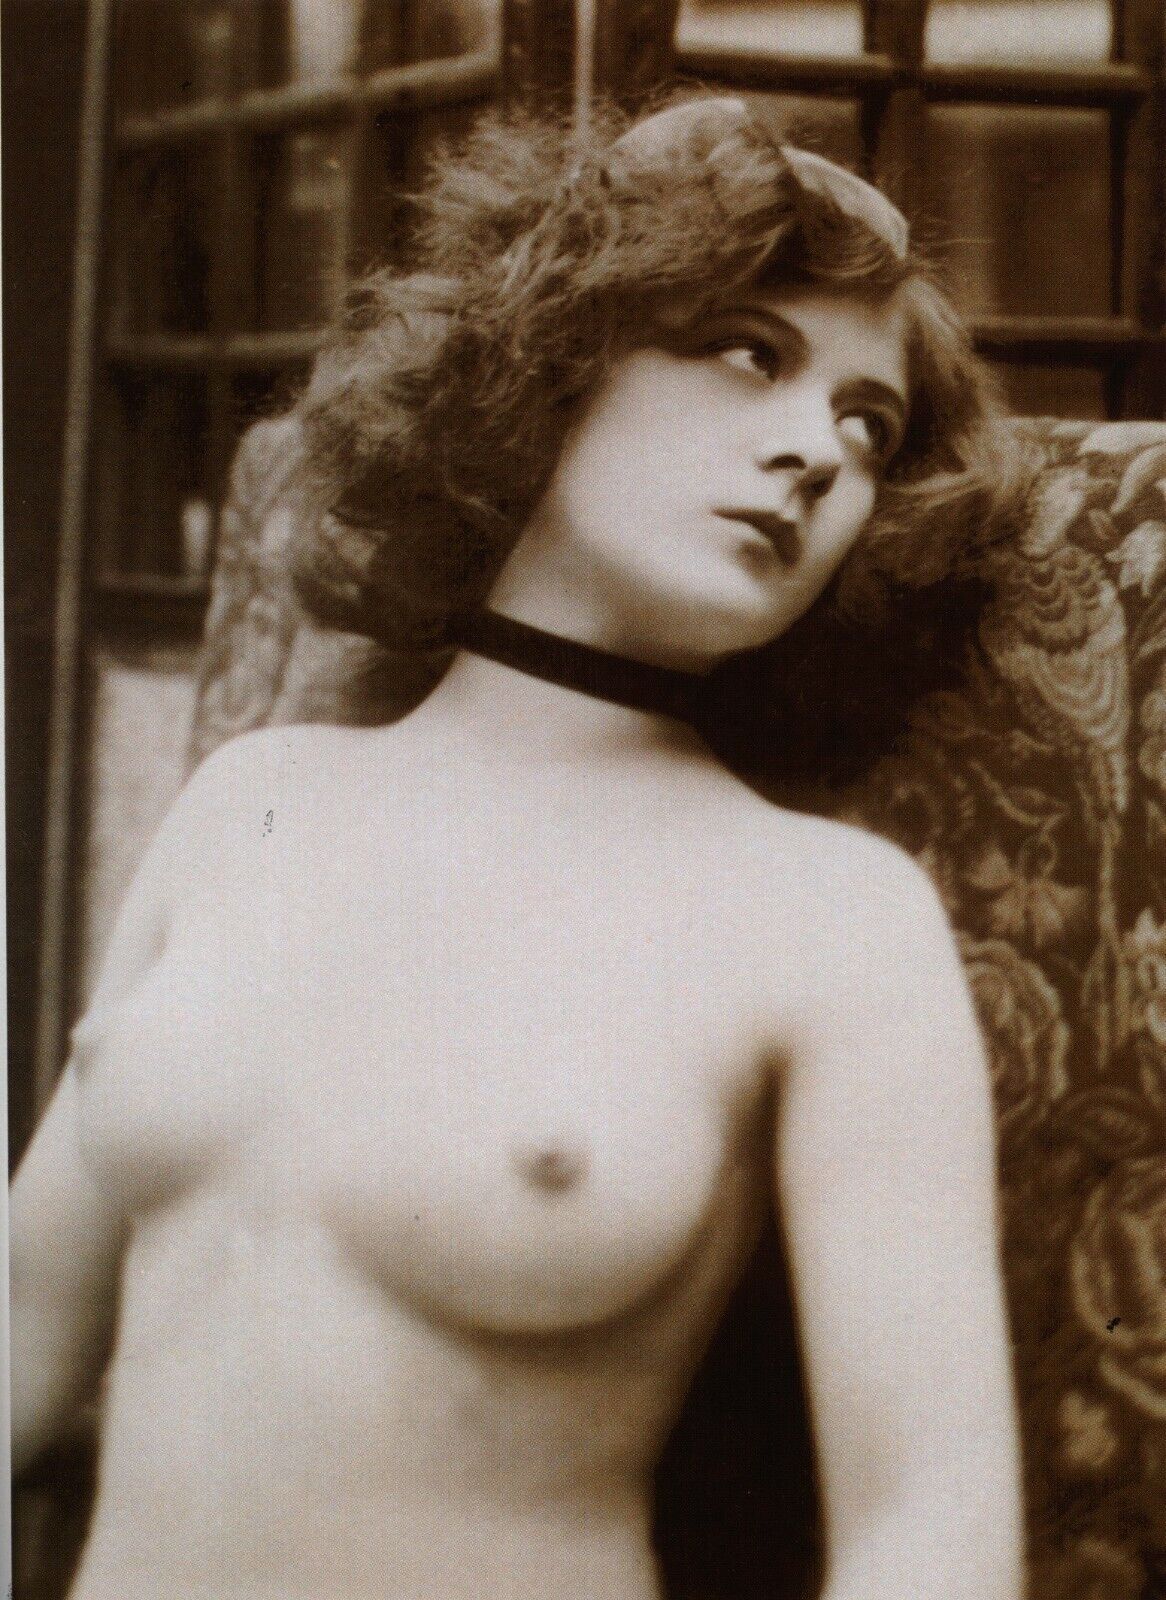 Antique Vintage Nude Model 8x10 Risque Photo Print from 1900s